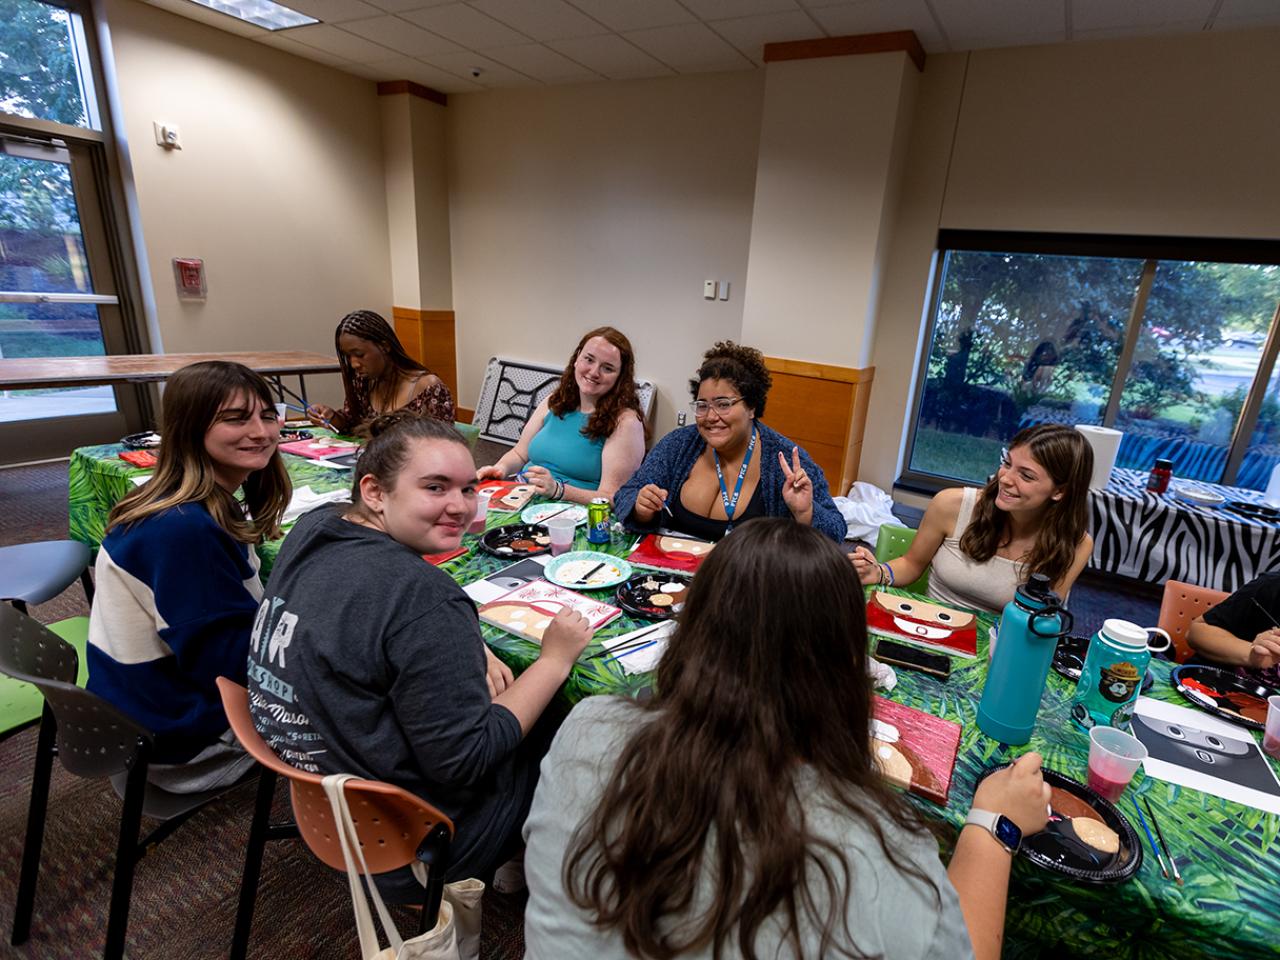 Students sit around a table with painting a canvas of Brutus Buckeye.